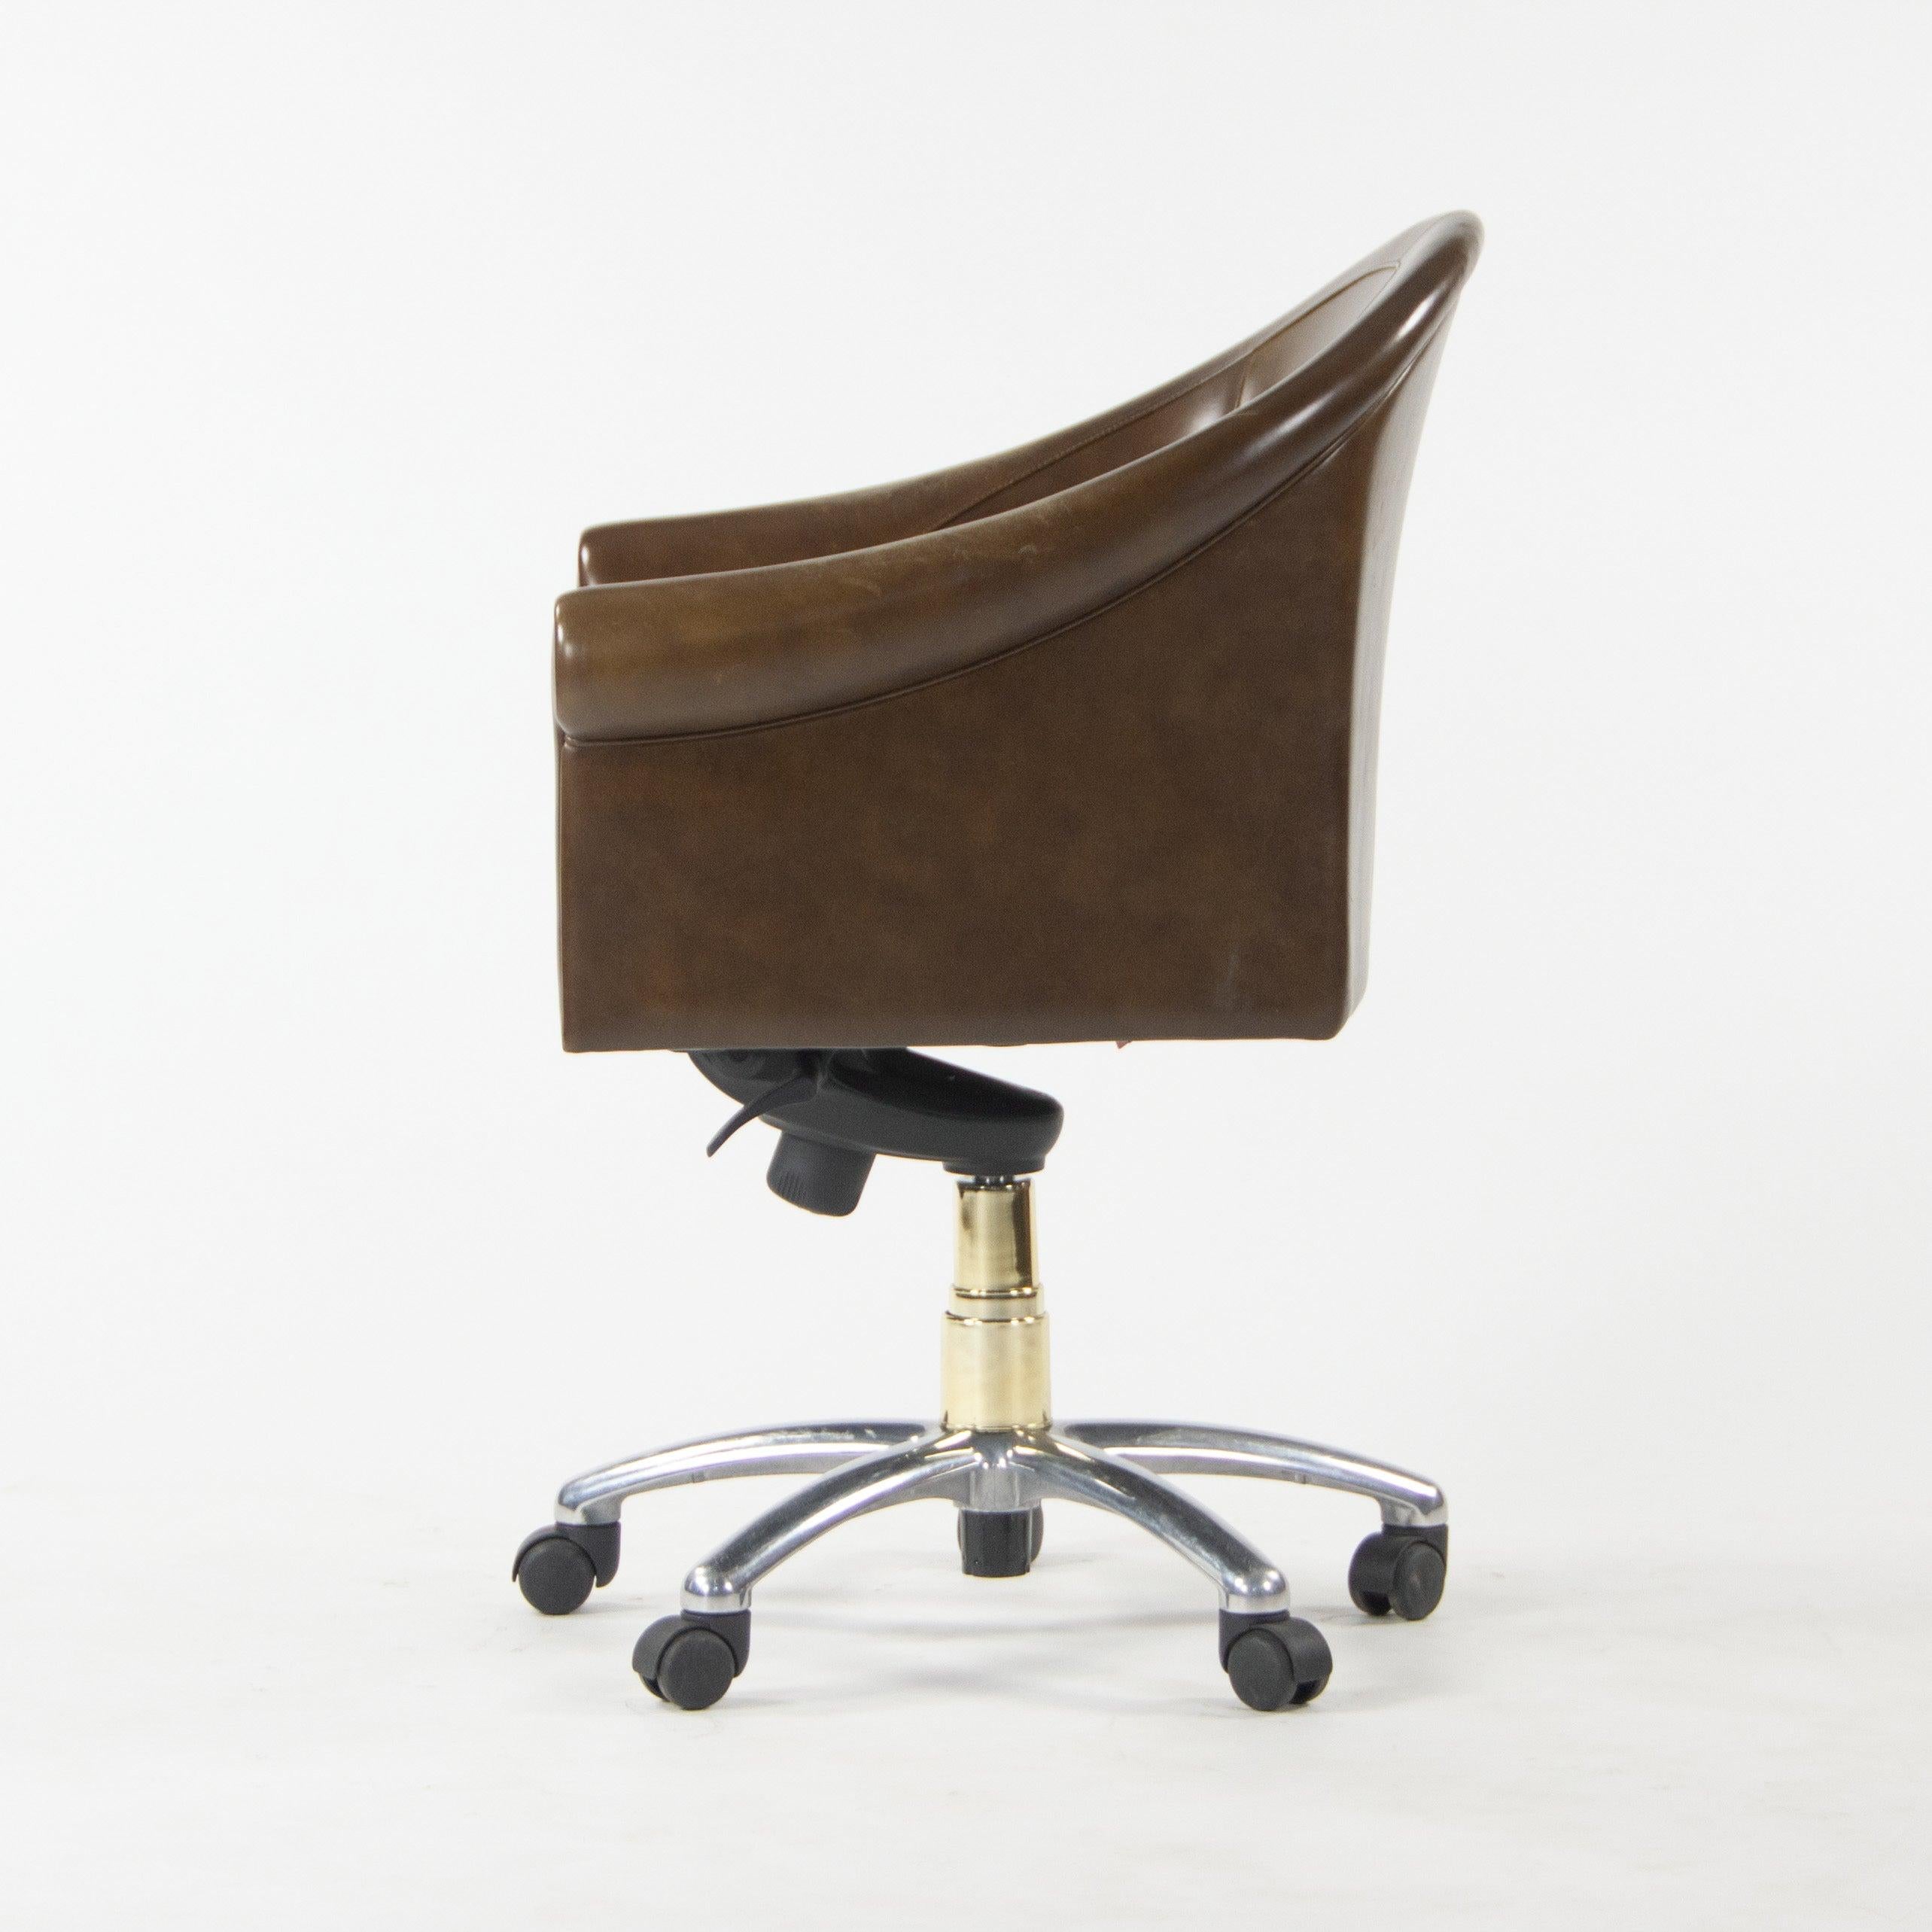 Contemporary Poltrona Frau Brown Leather Luca Scacchetti Sinan Office Desk Chair For Sale